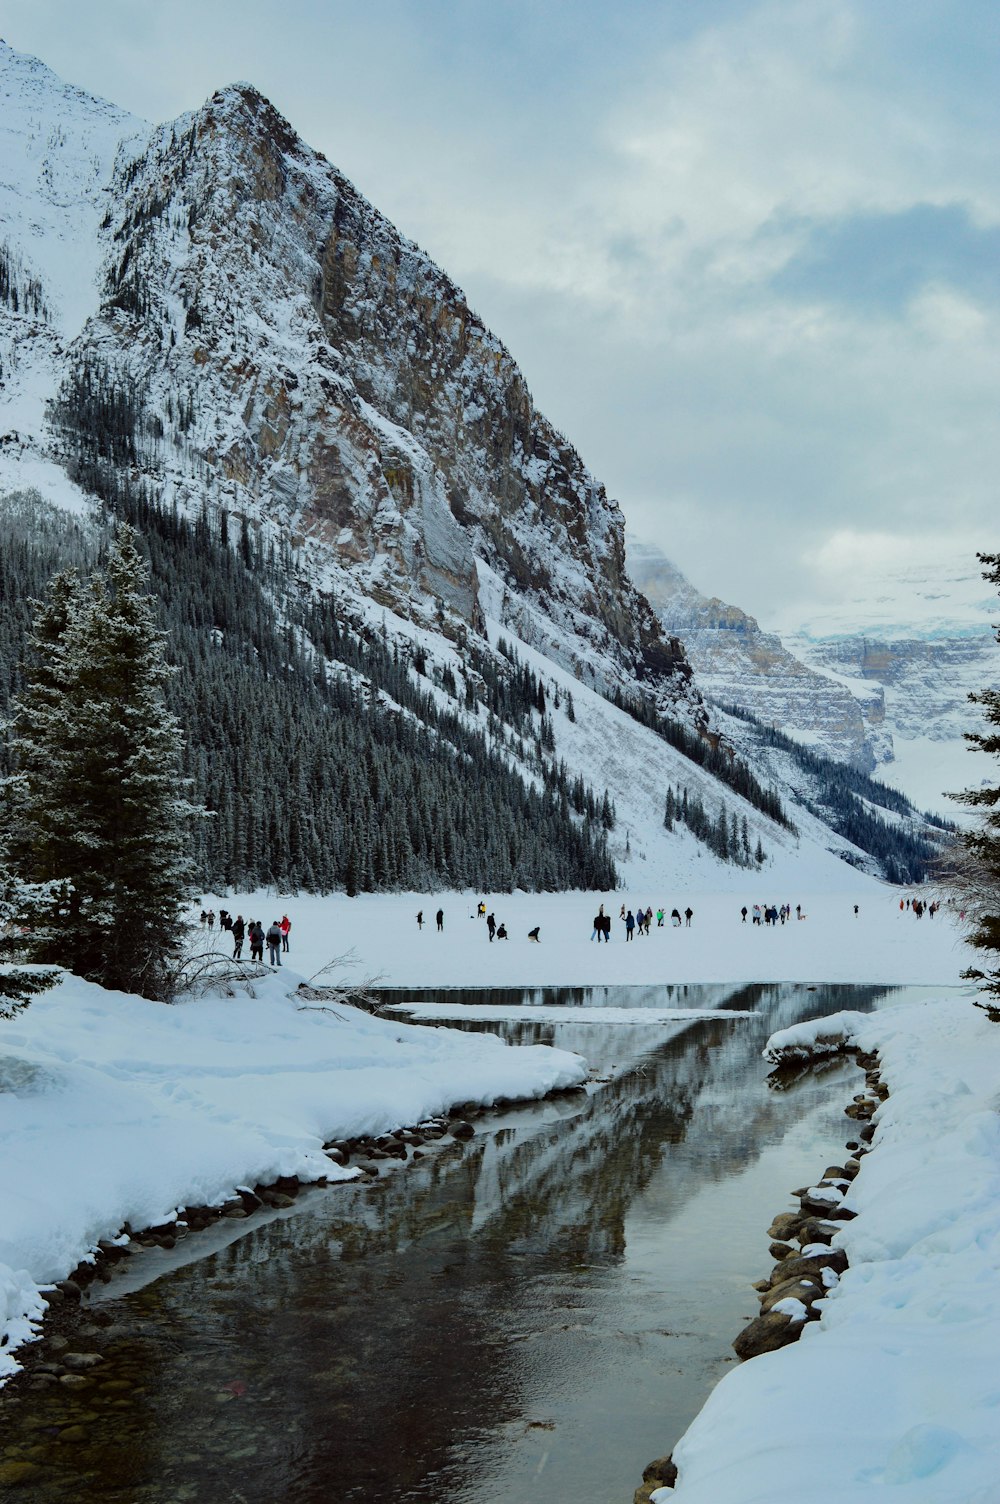 a group of people walking across a snow covered mountain